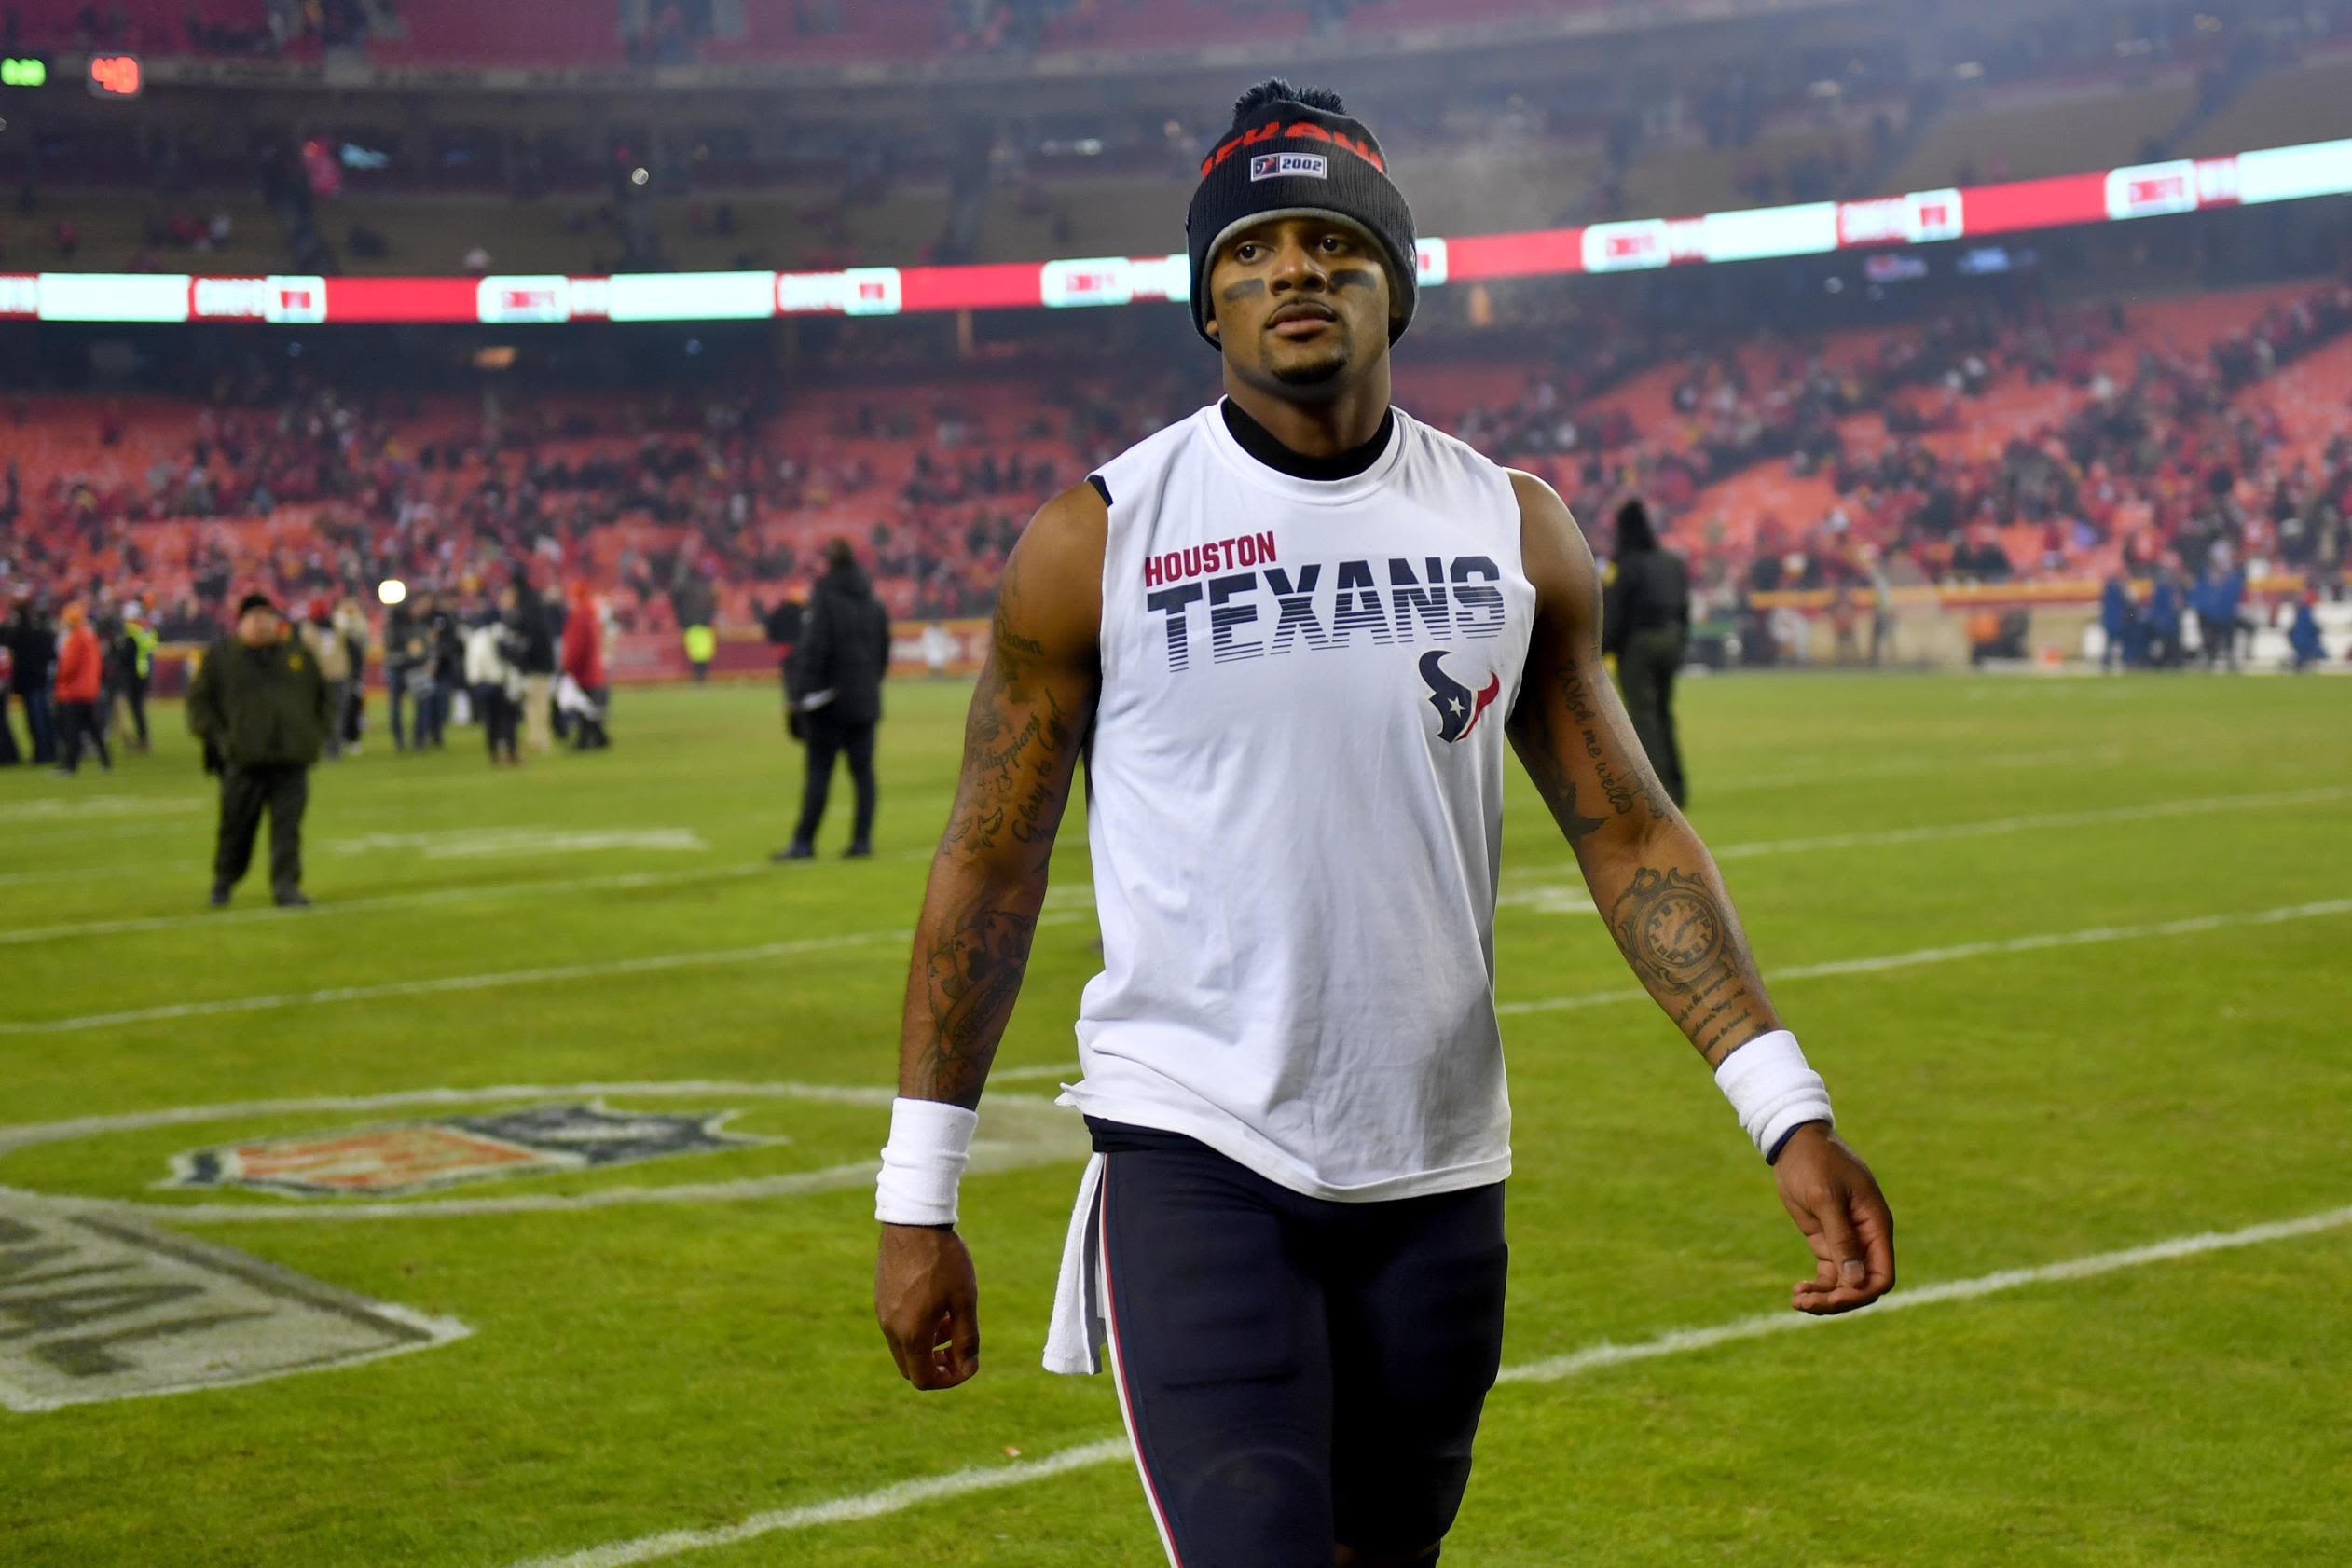 Deshaun Watson set to be traded from Houston Texans to Cleveland Browns